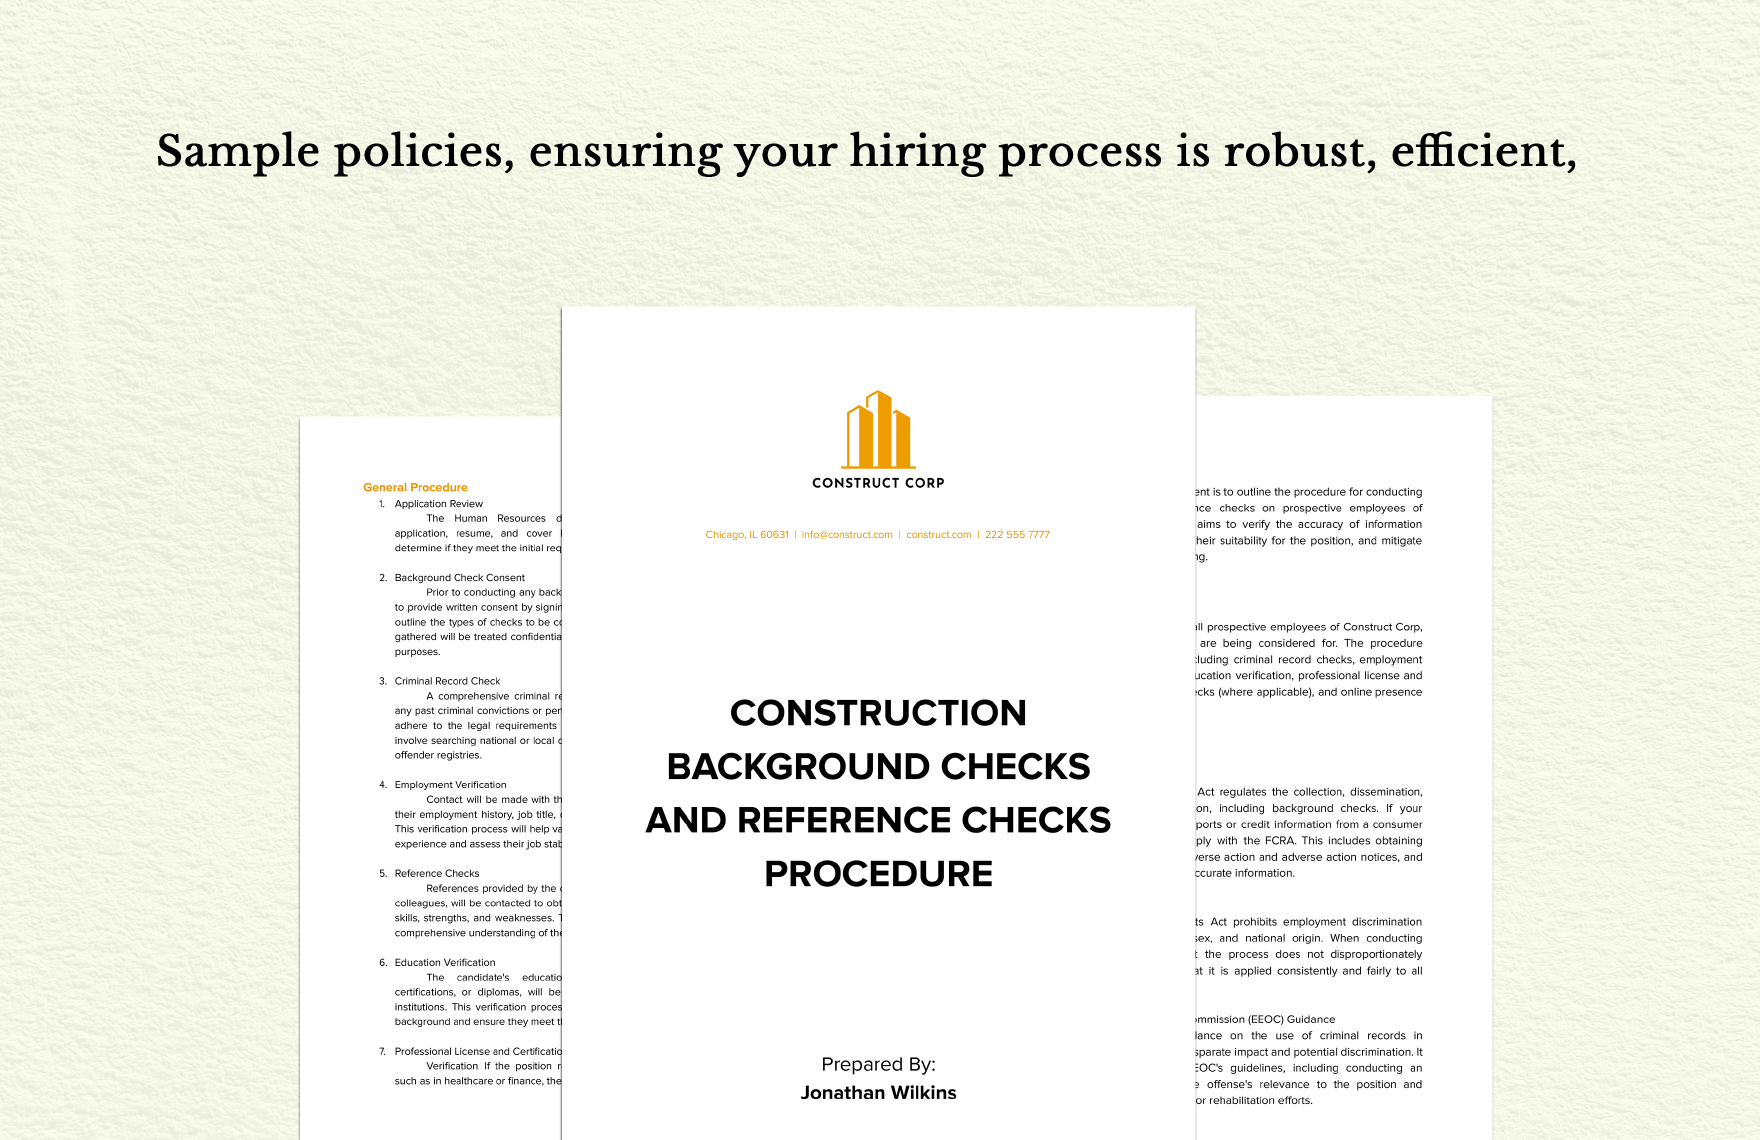 Construction Background Checks and Reference Checks Procedure 